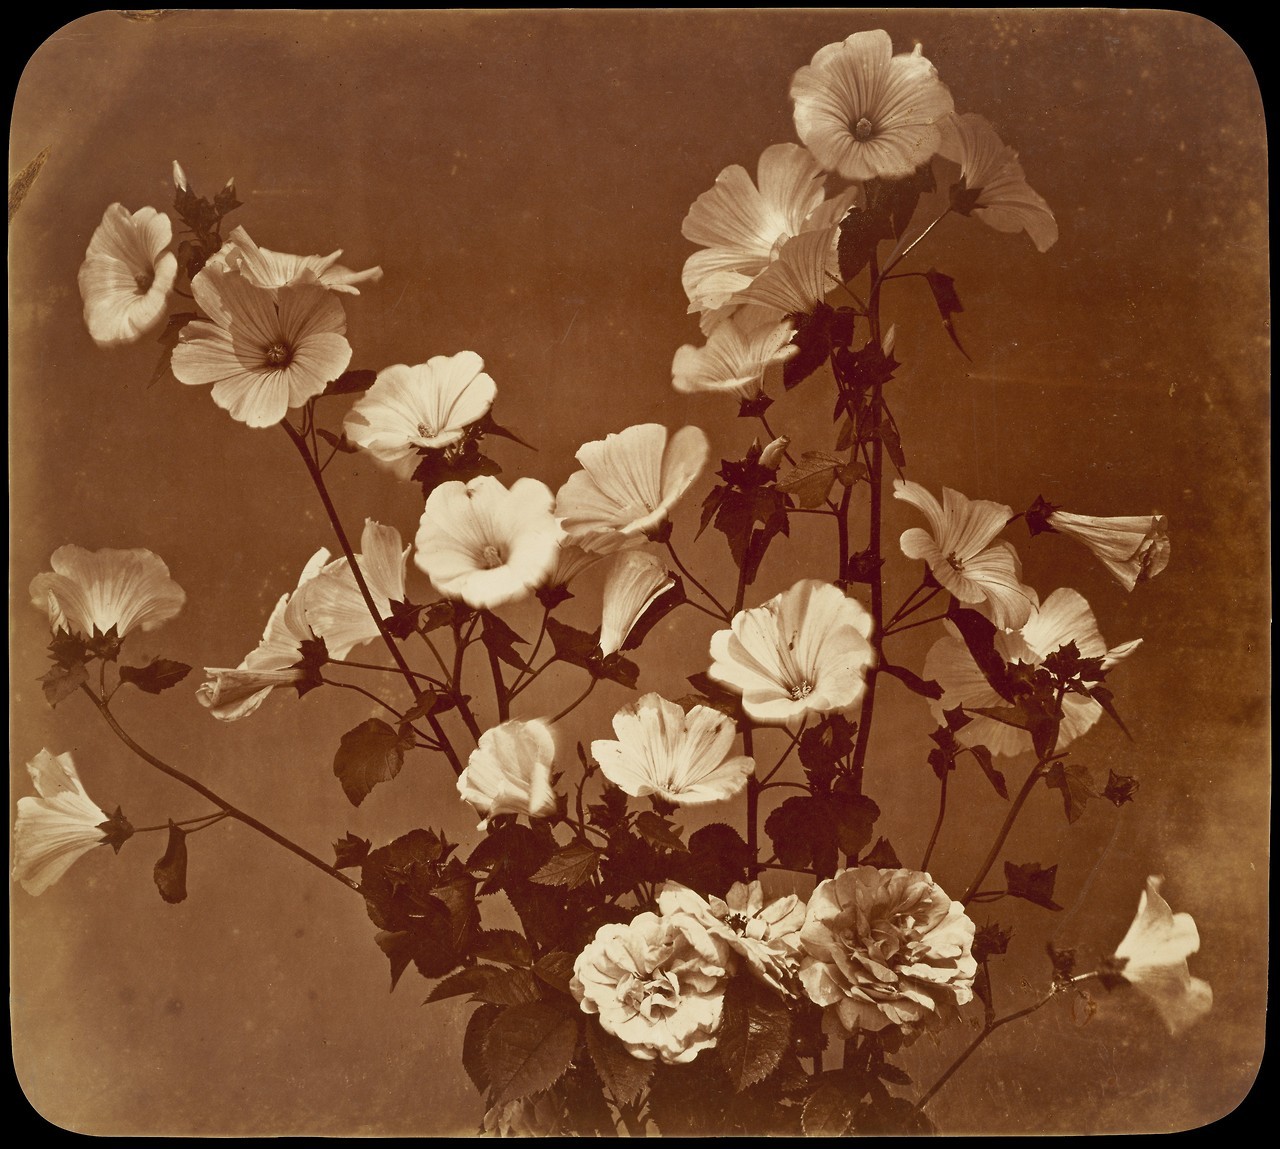 met-photos:
“ [Flower Study, Rose of Sharon] by Adolphe Braun, The Met’s Photography Department
Medium: Albumen silver print from glass negative
Gift of Gilman Paper Company, in memory of Samuel J. Wagstaff Jr., 1987 Metropolitan Museum of Art, New...